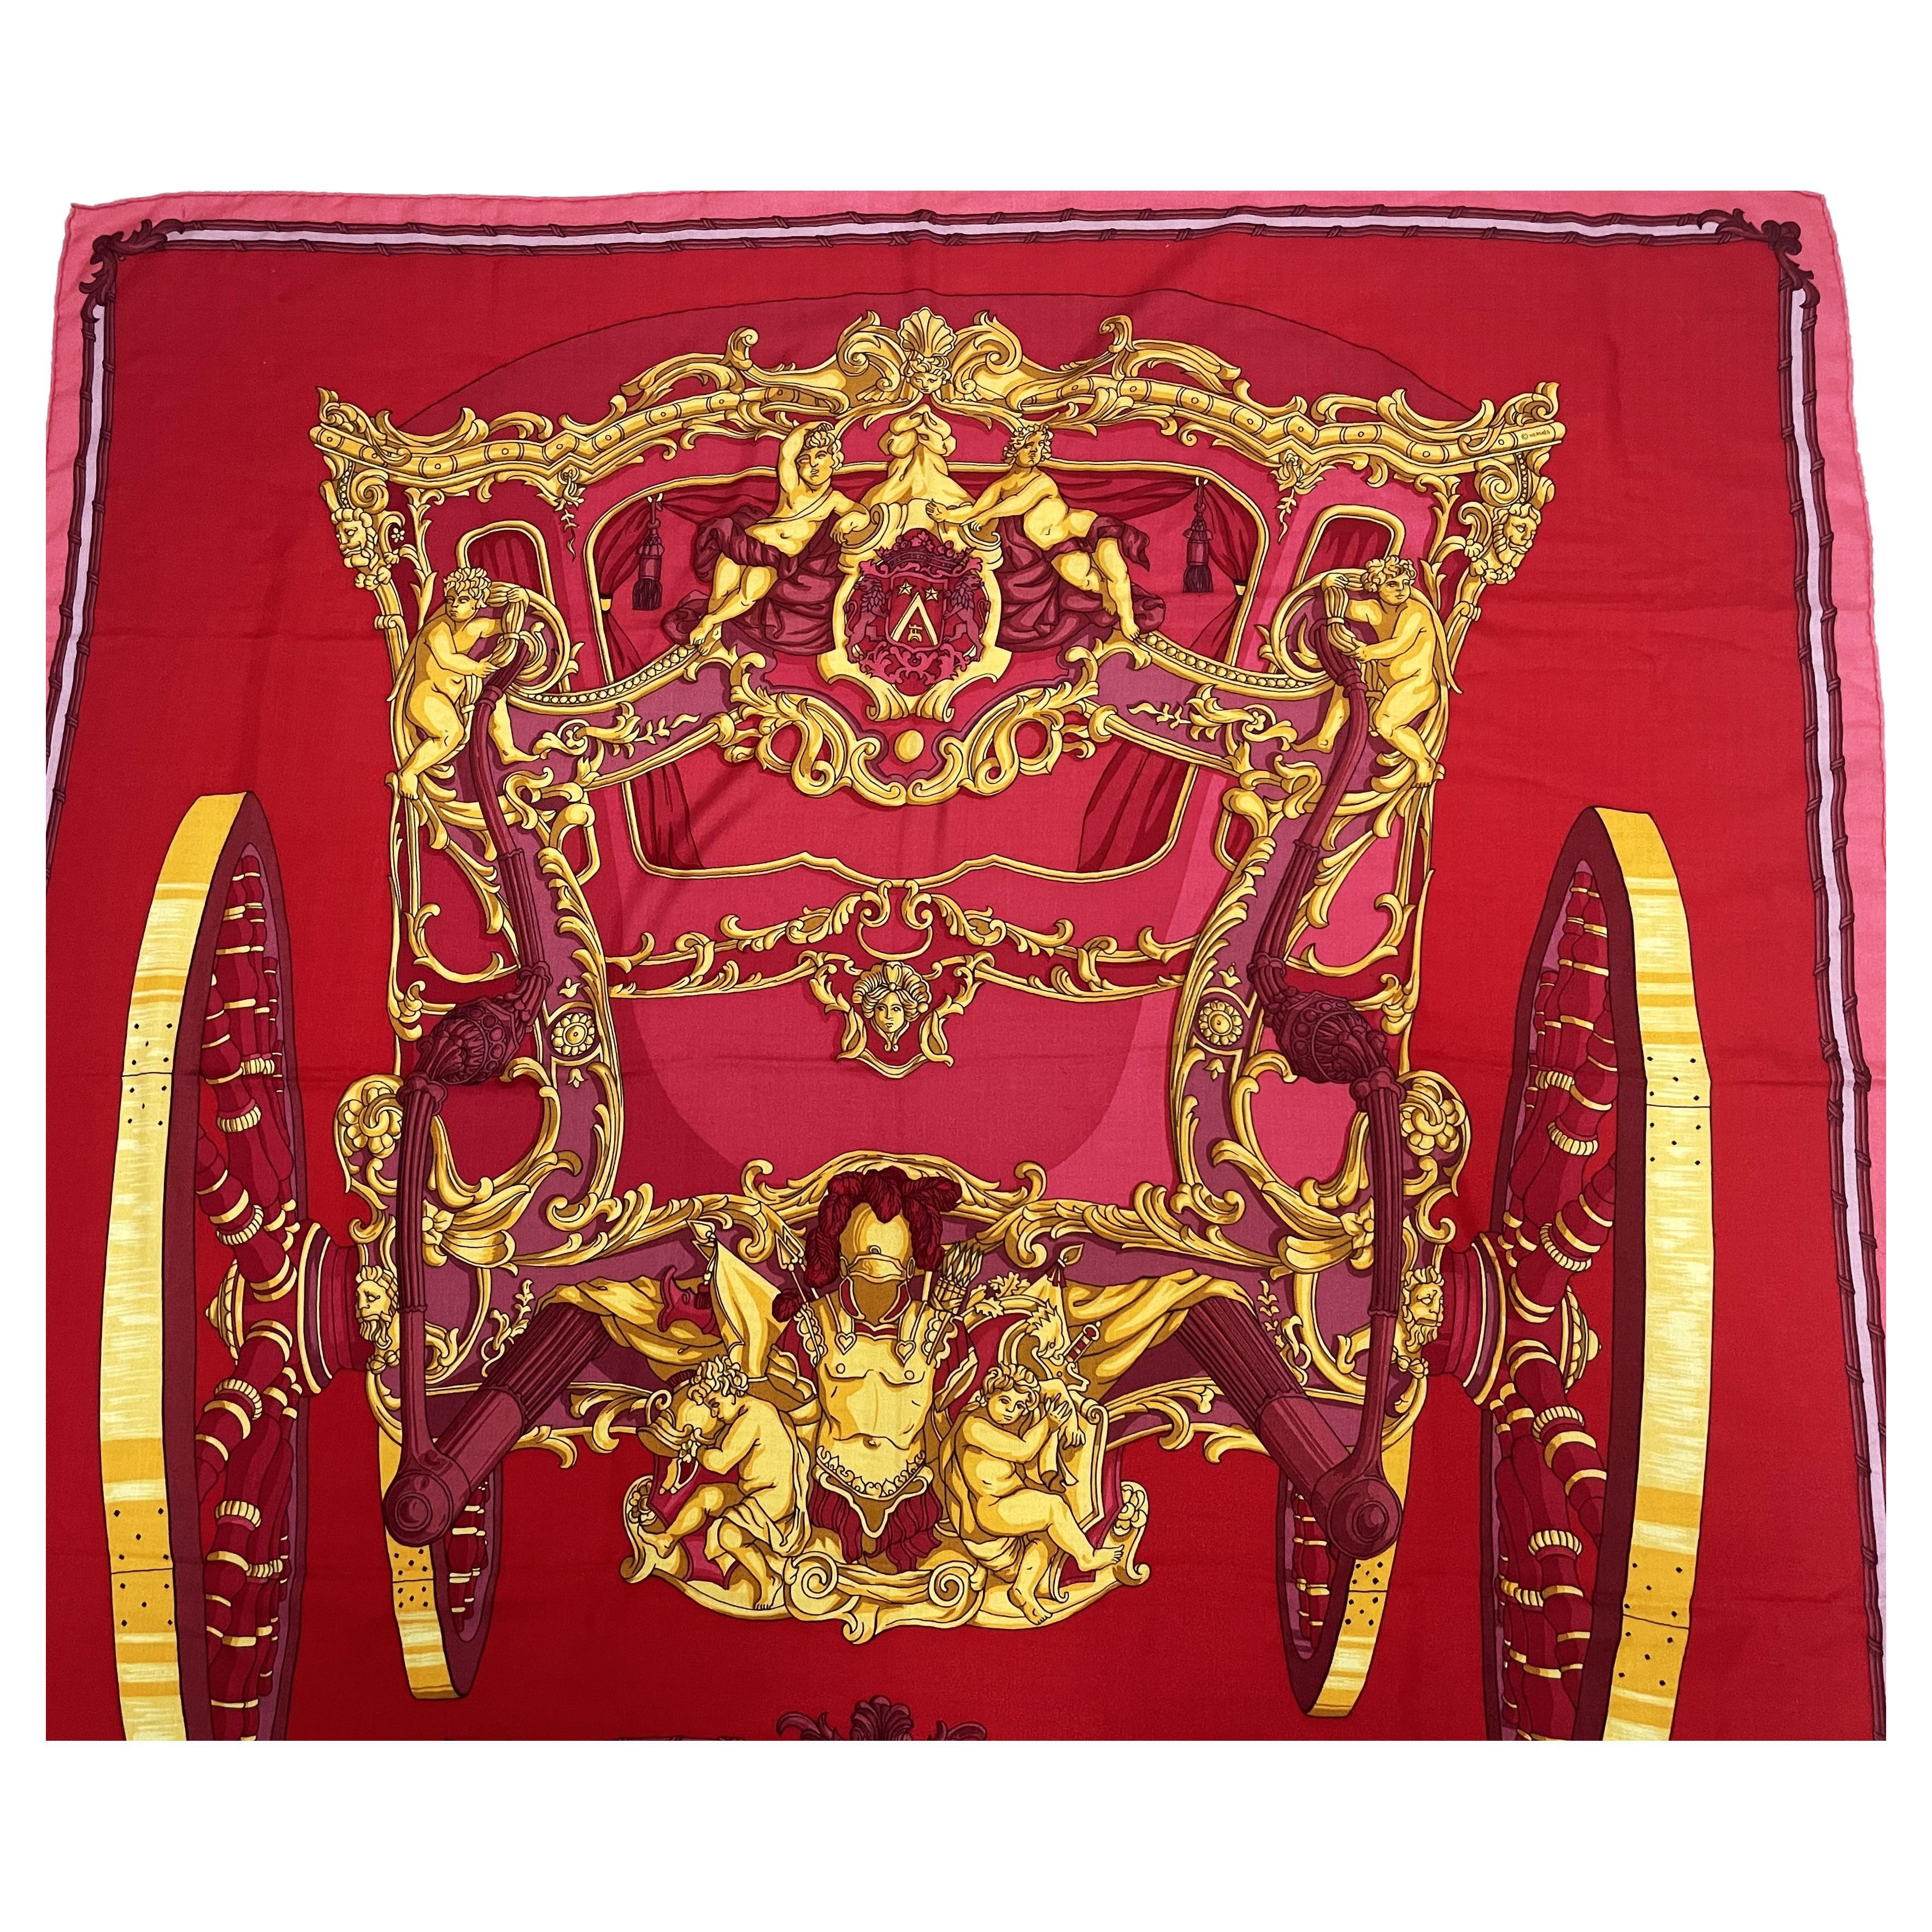 Very beautiful decorative 140 cm x 140 cm scarf made of 65% cashmere and 35% silk in the colors red, yellow and pink.

The theme of the large Hermes Shawel  is:
'GRAND CARROSSE povr by AMBASSADEVR par HERMES A PARIS' ANNO MDCC: 

Measurement 140 cm